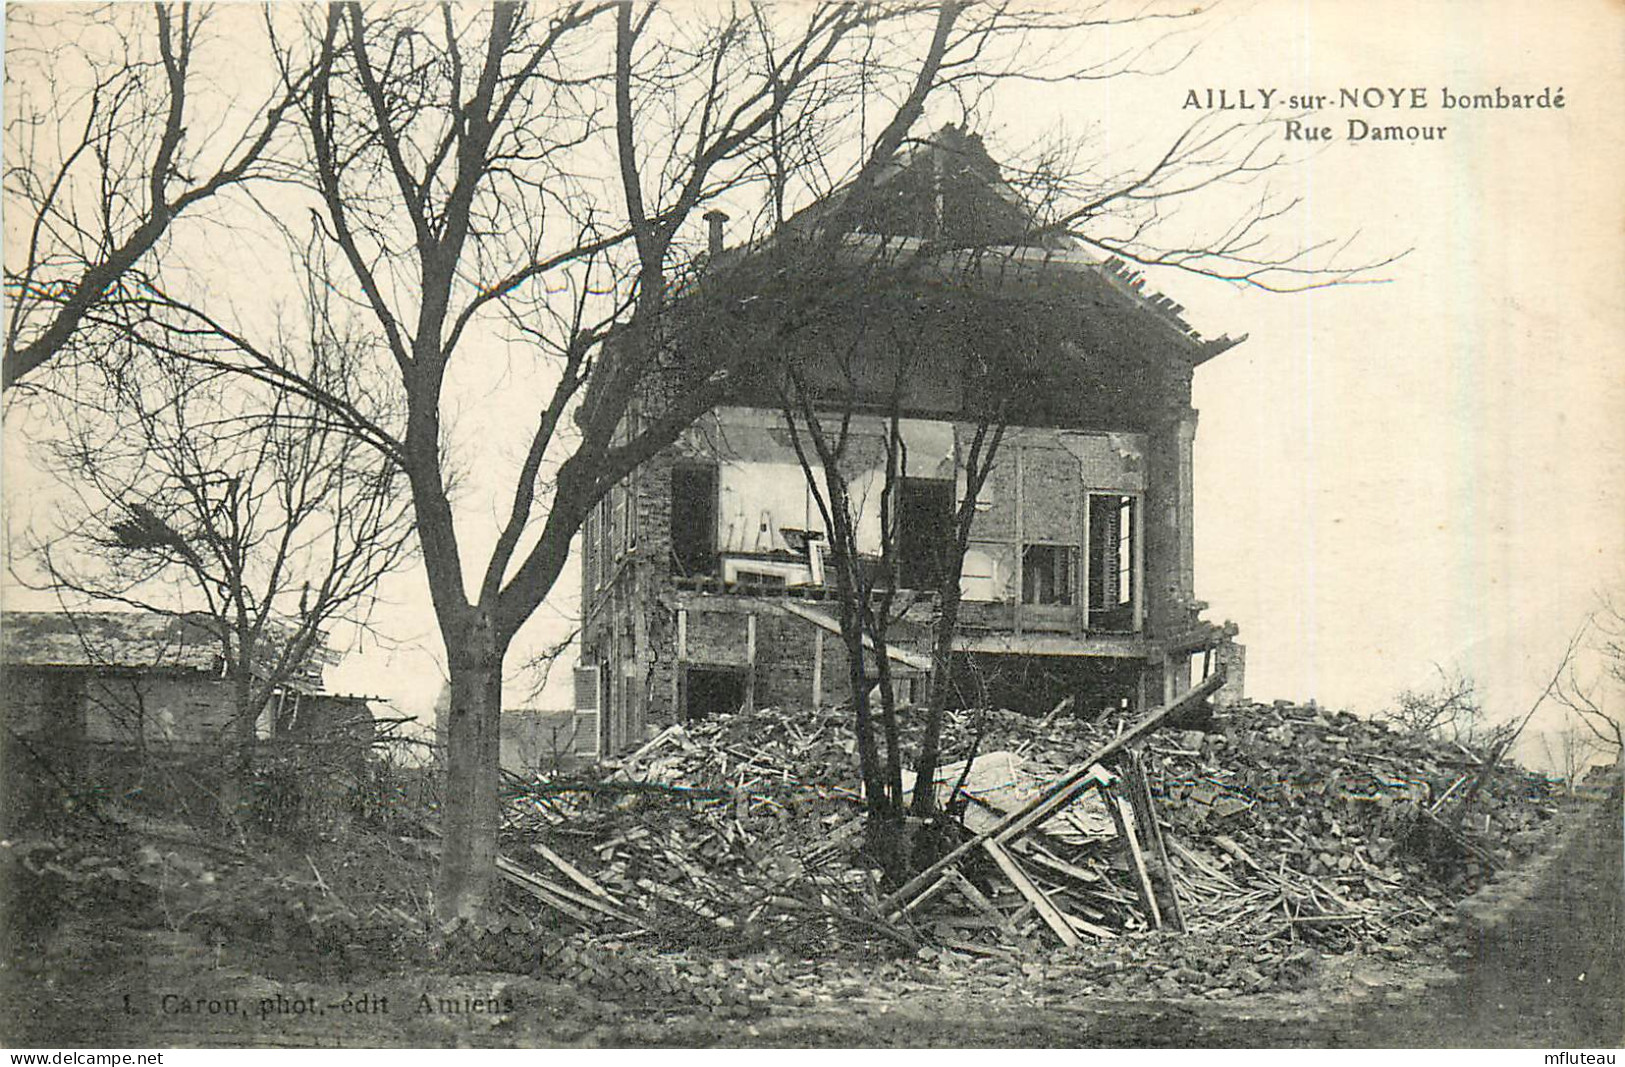 80* AILLY S/NOYE  Bombarde - Rue Damour - Ruines WW1  RL31,0489 - Ailly Sur Noye